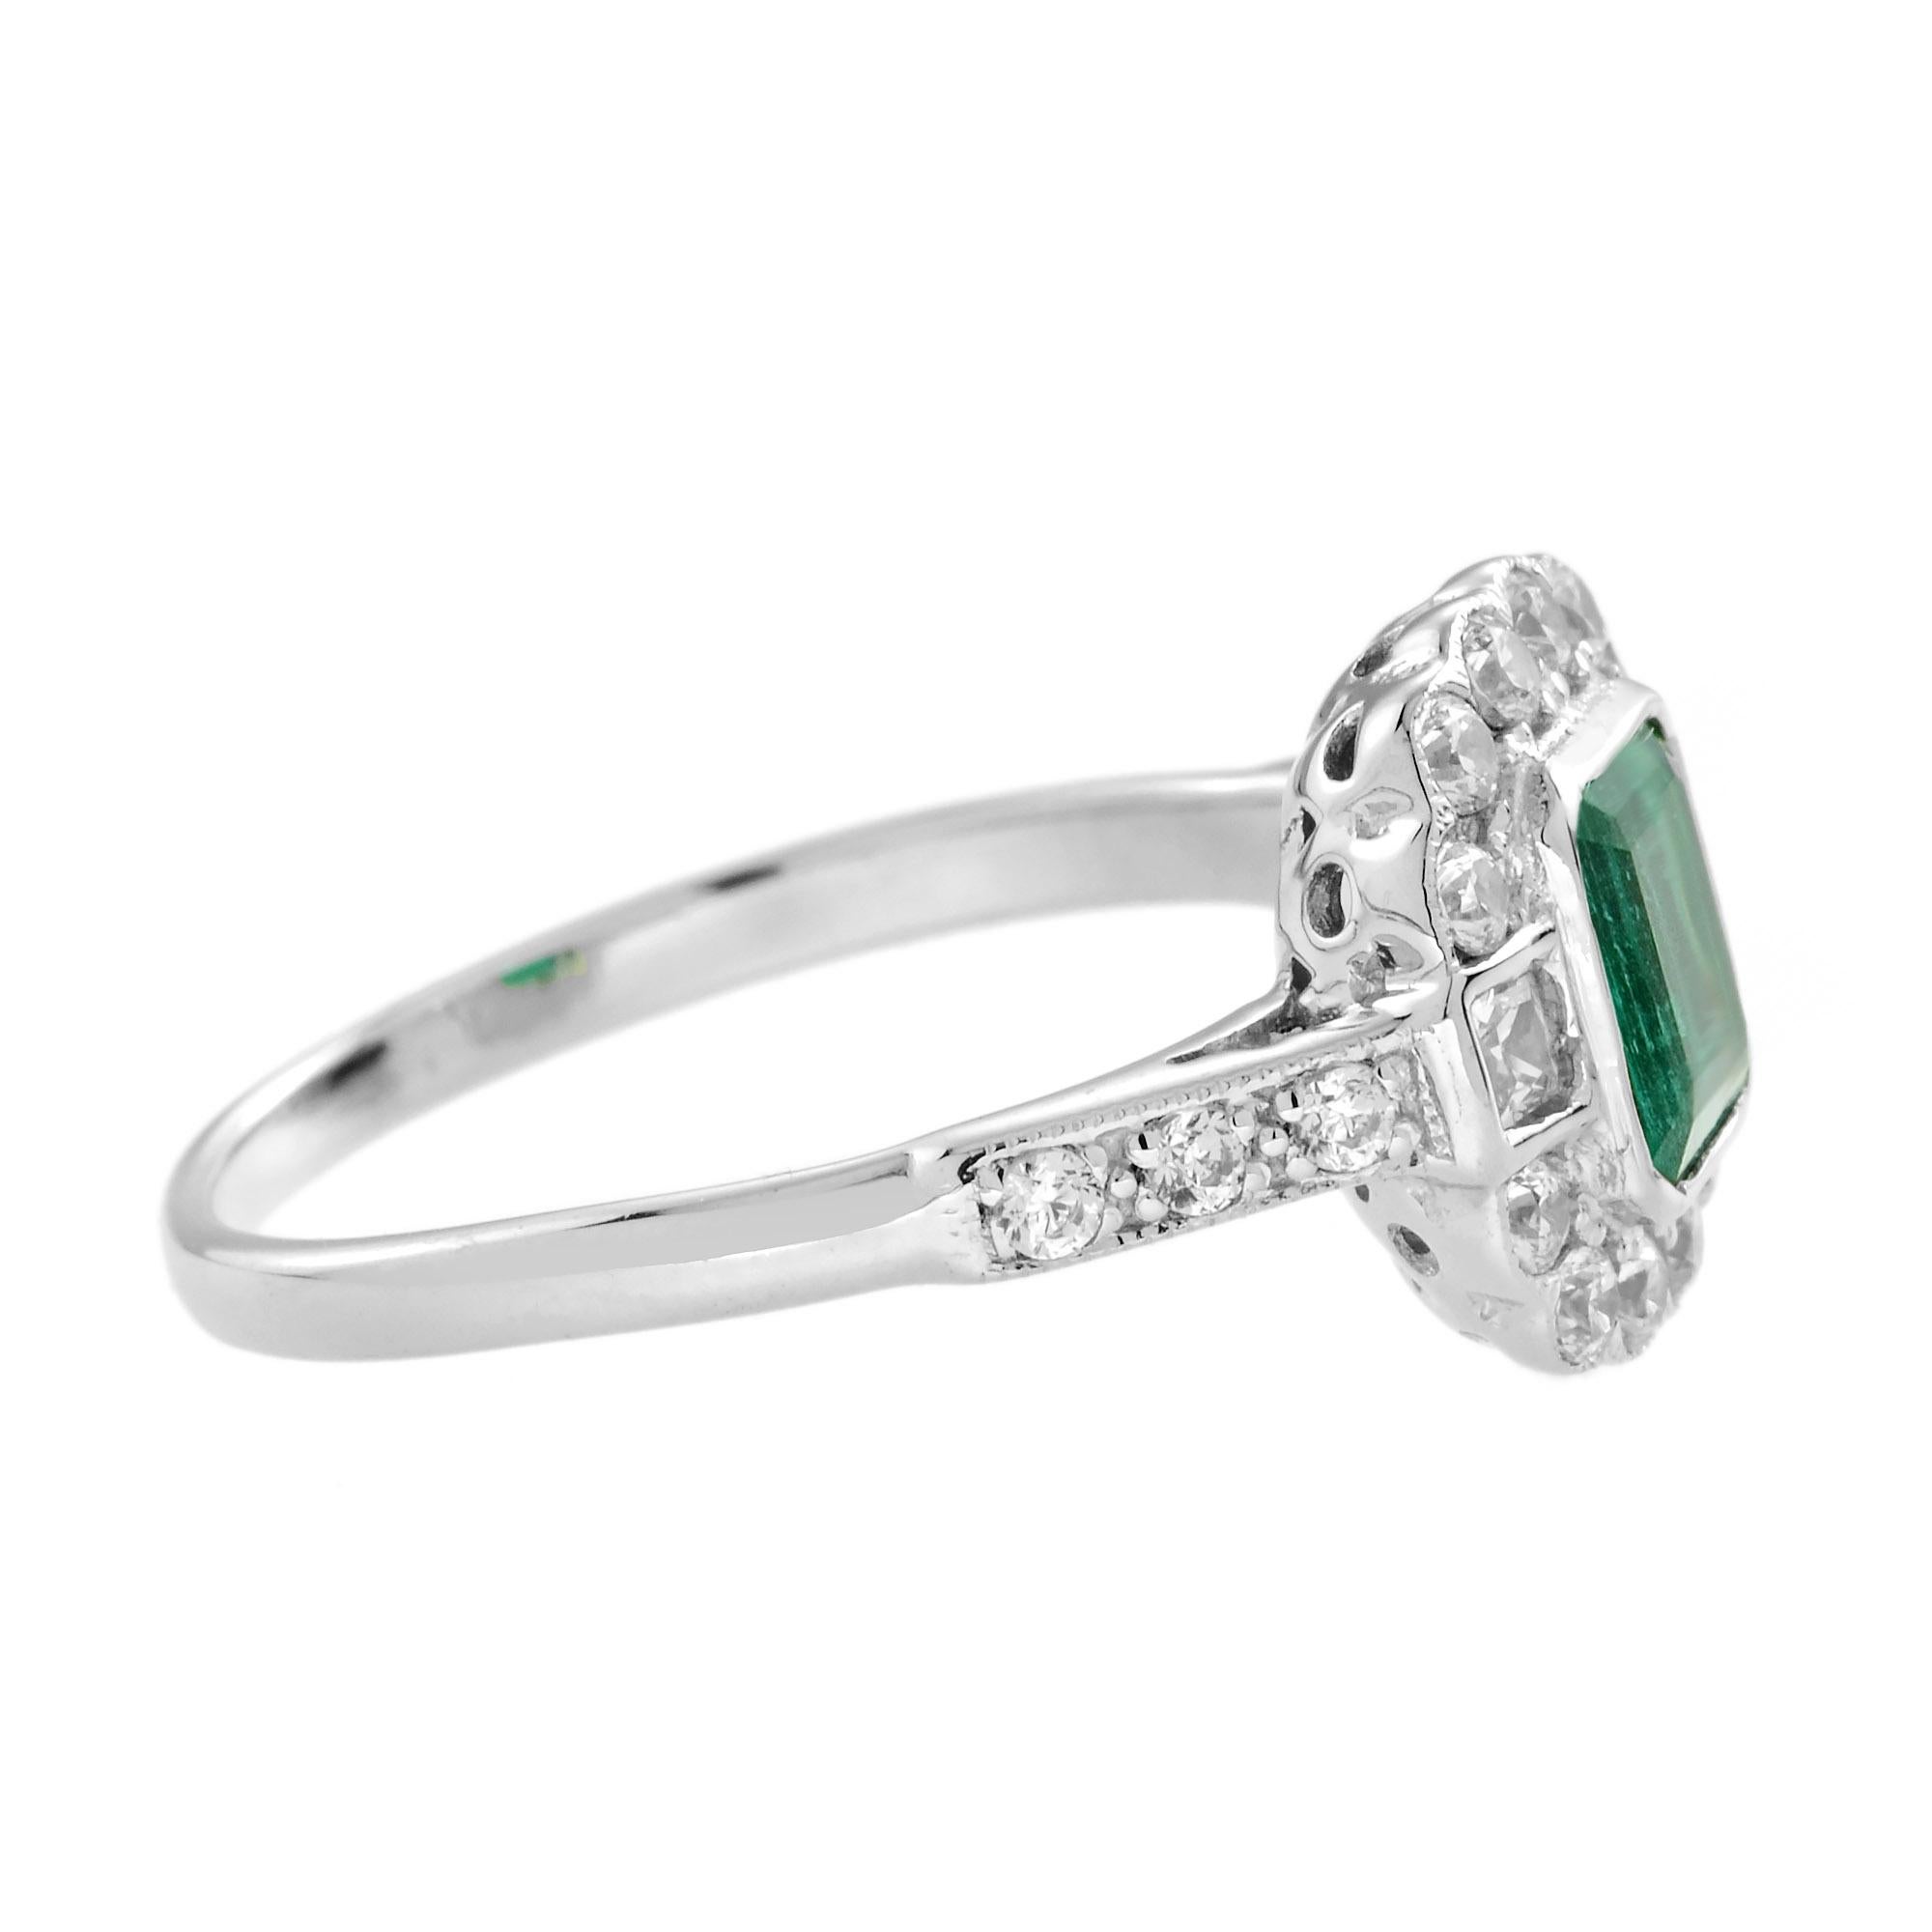 Octagon Cut 0.60 Ct. Emerald Diamond Halo Antique Style Engagement Ring in 18K White Gold For Sale